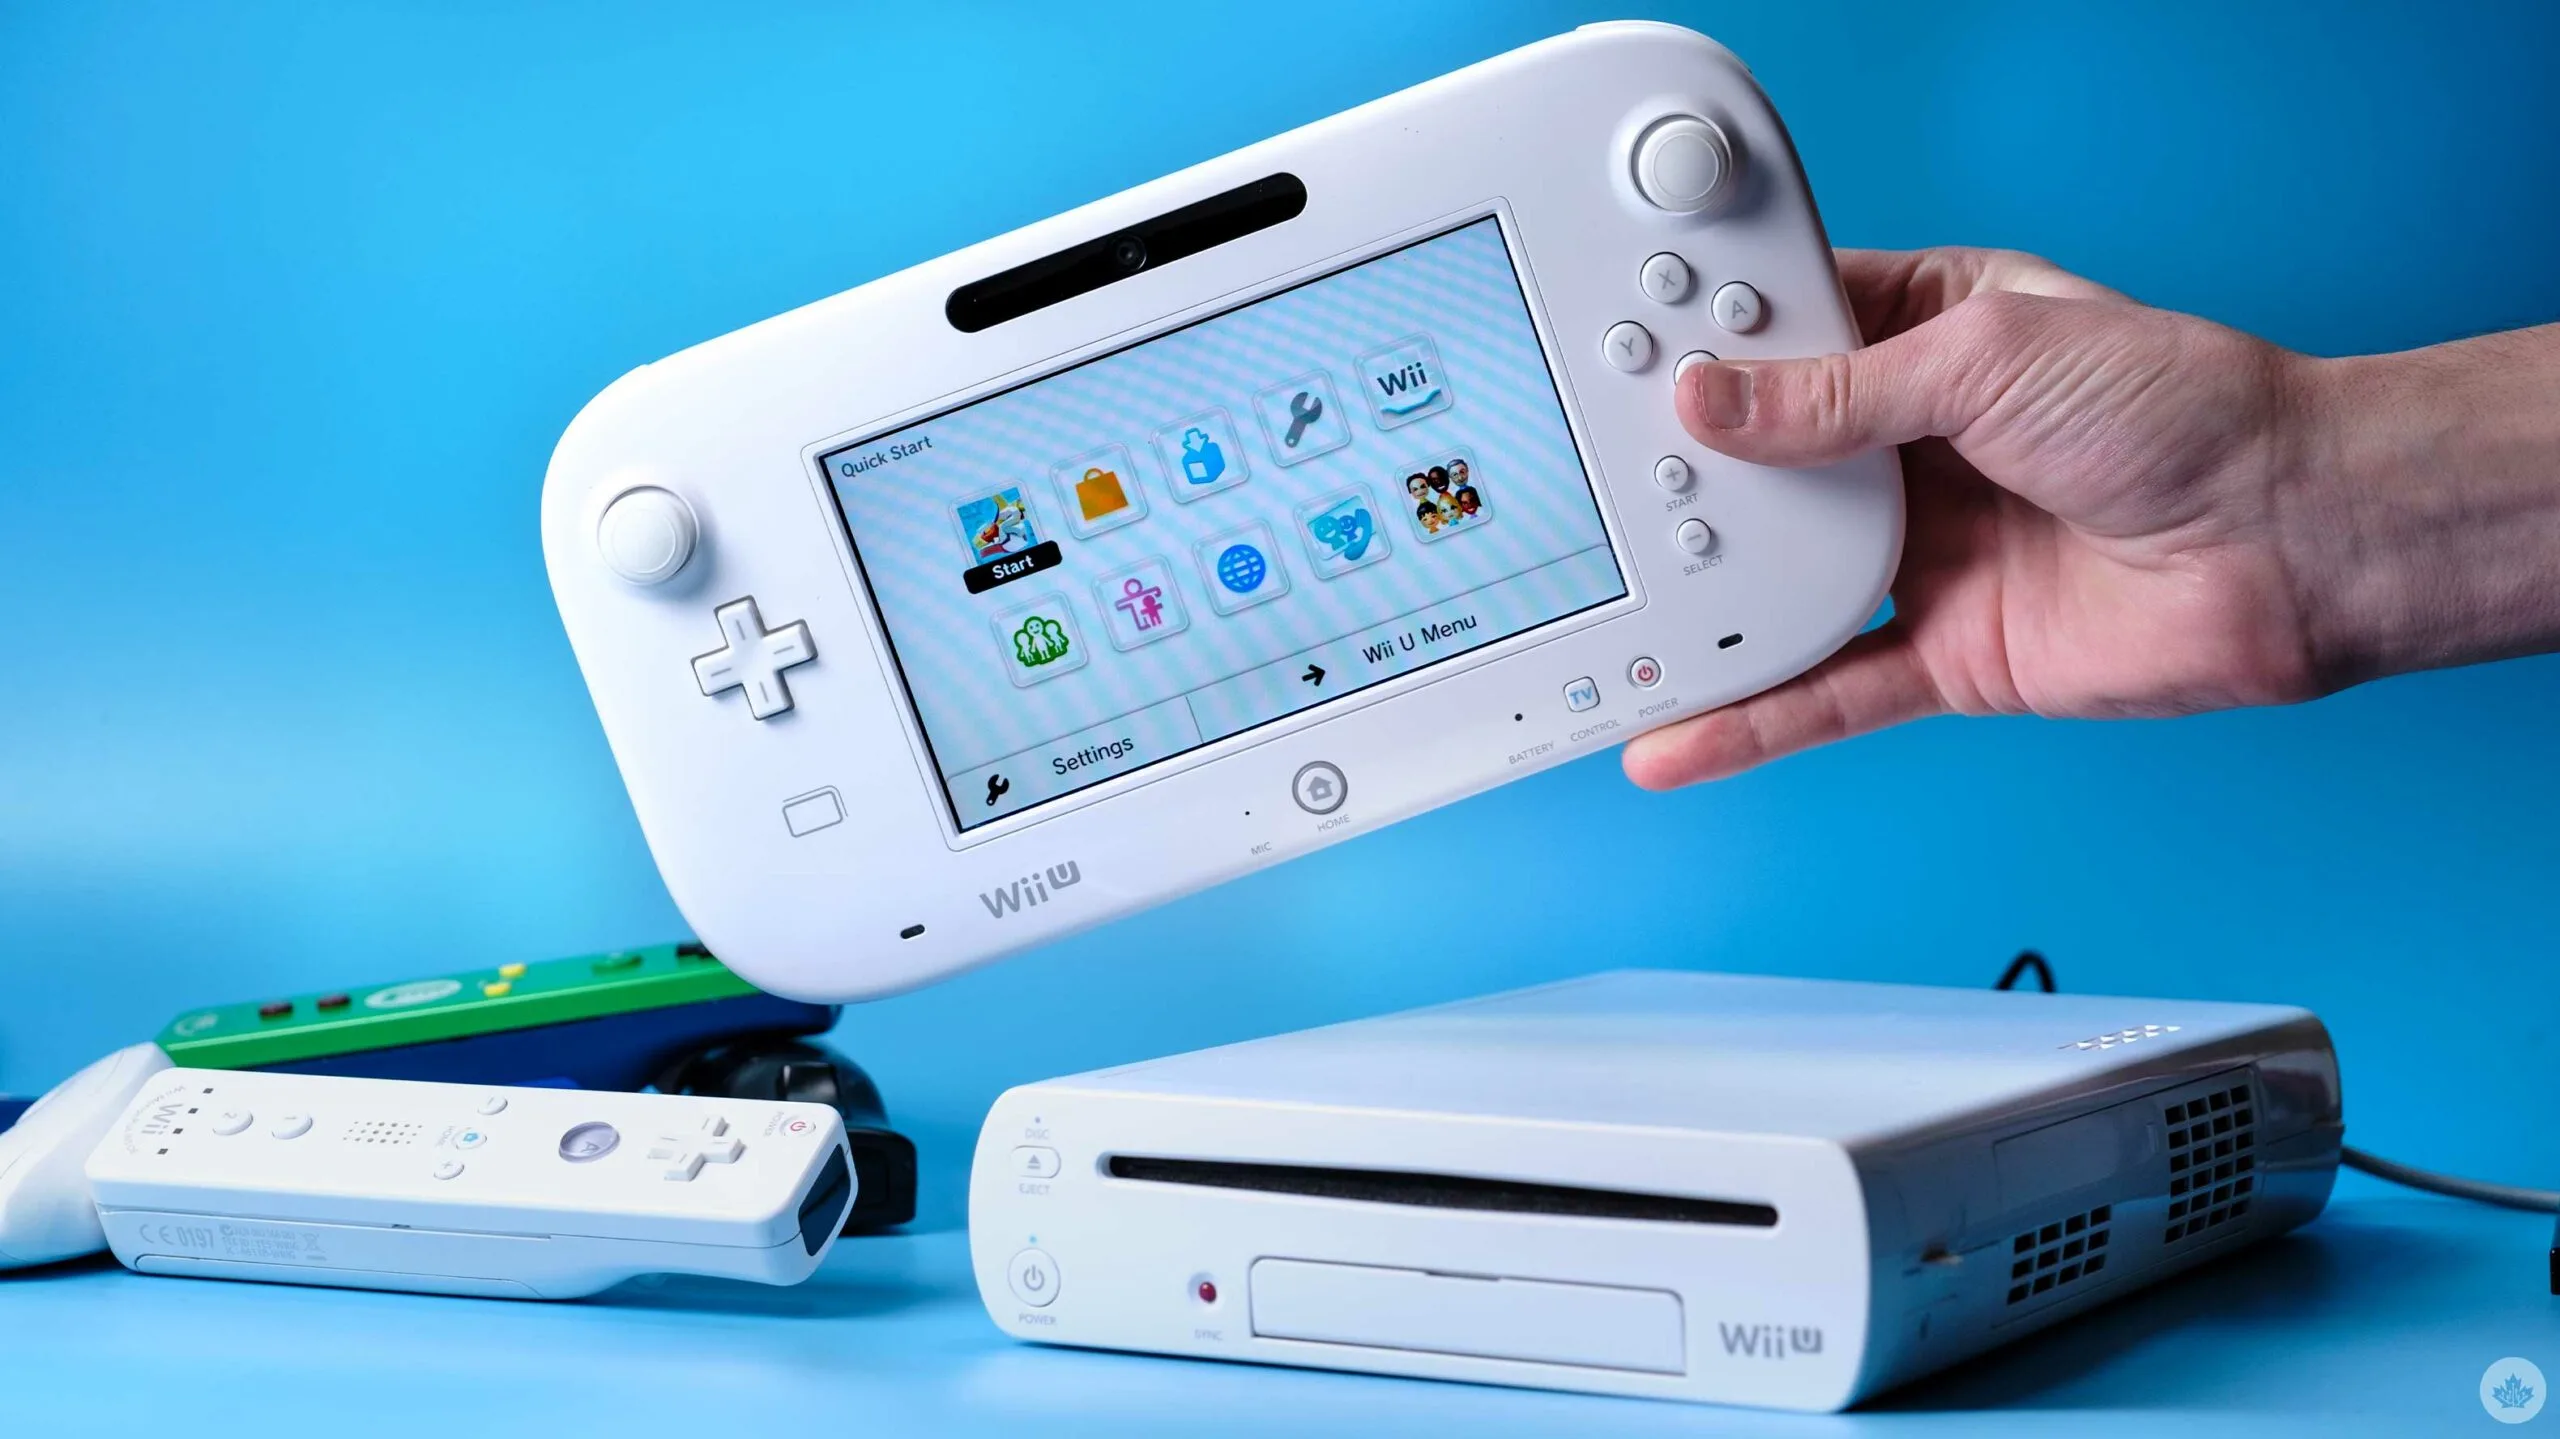 Difference between Nintendo Wii U and Wii